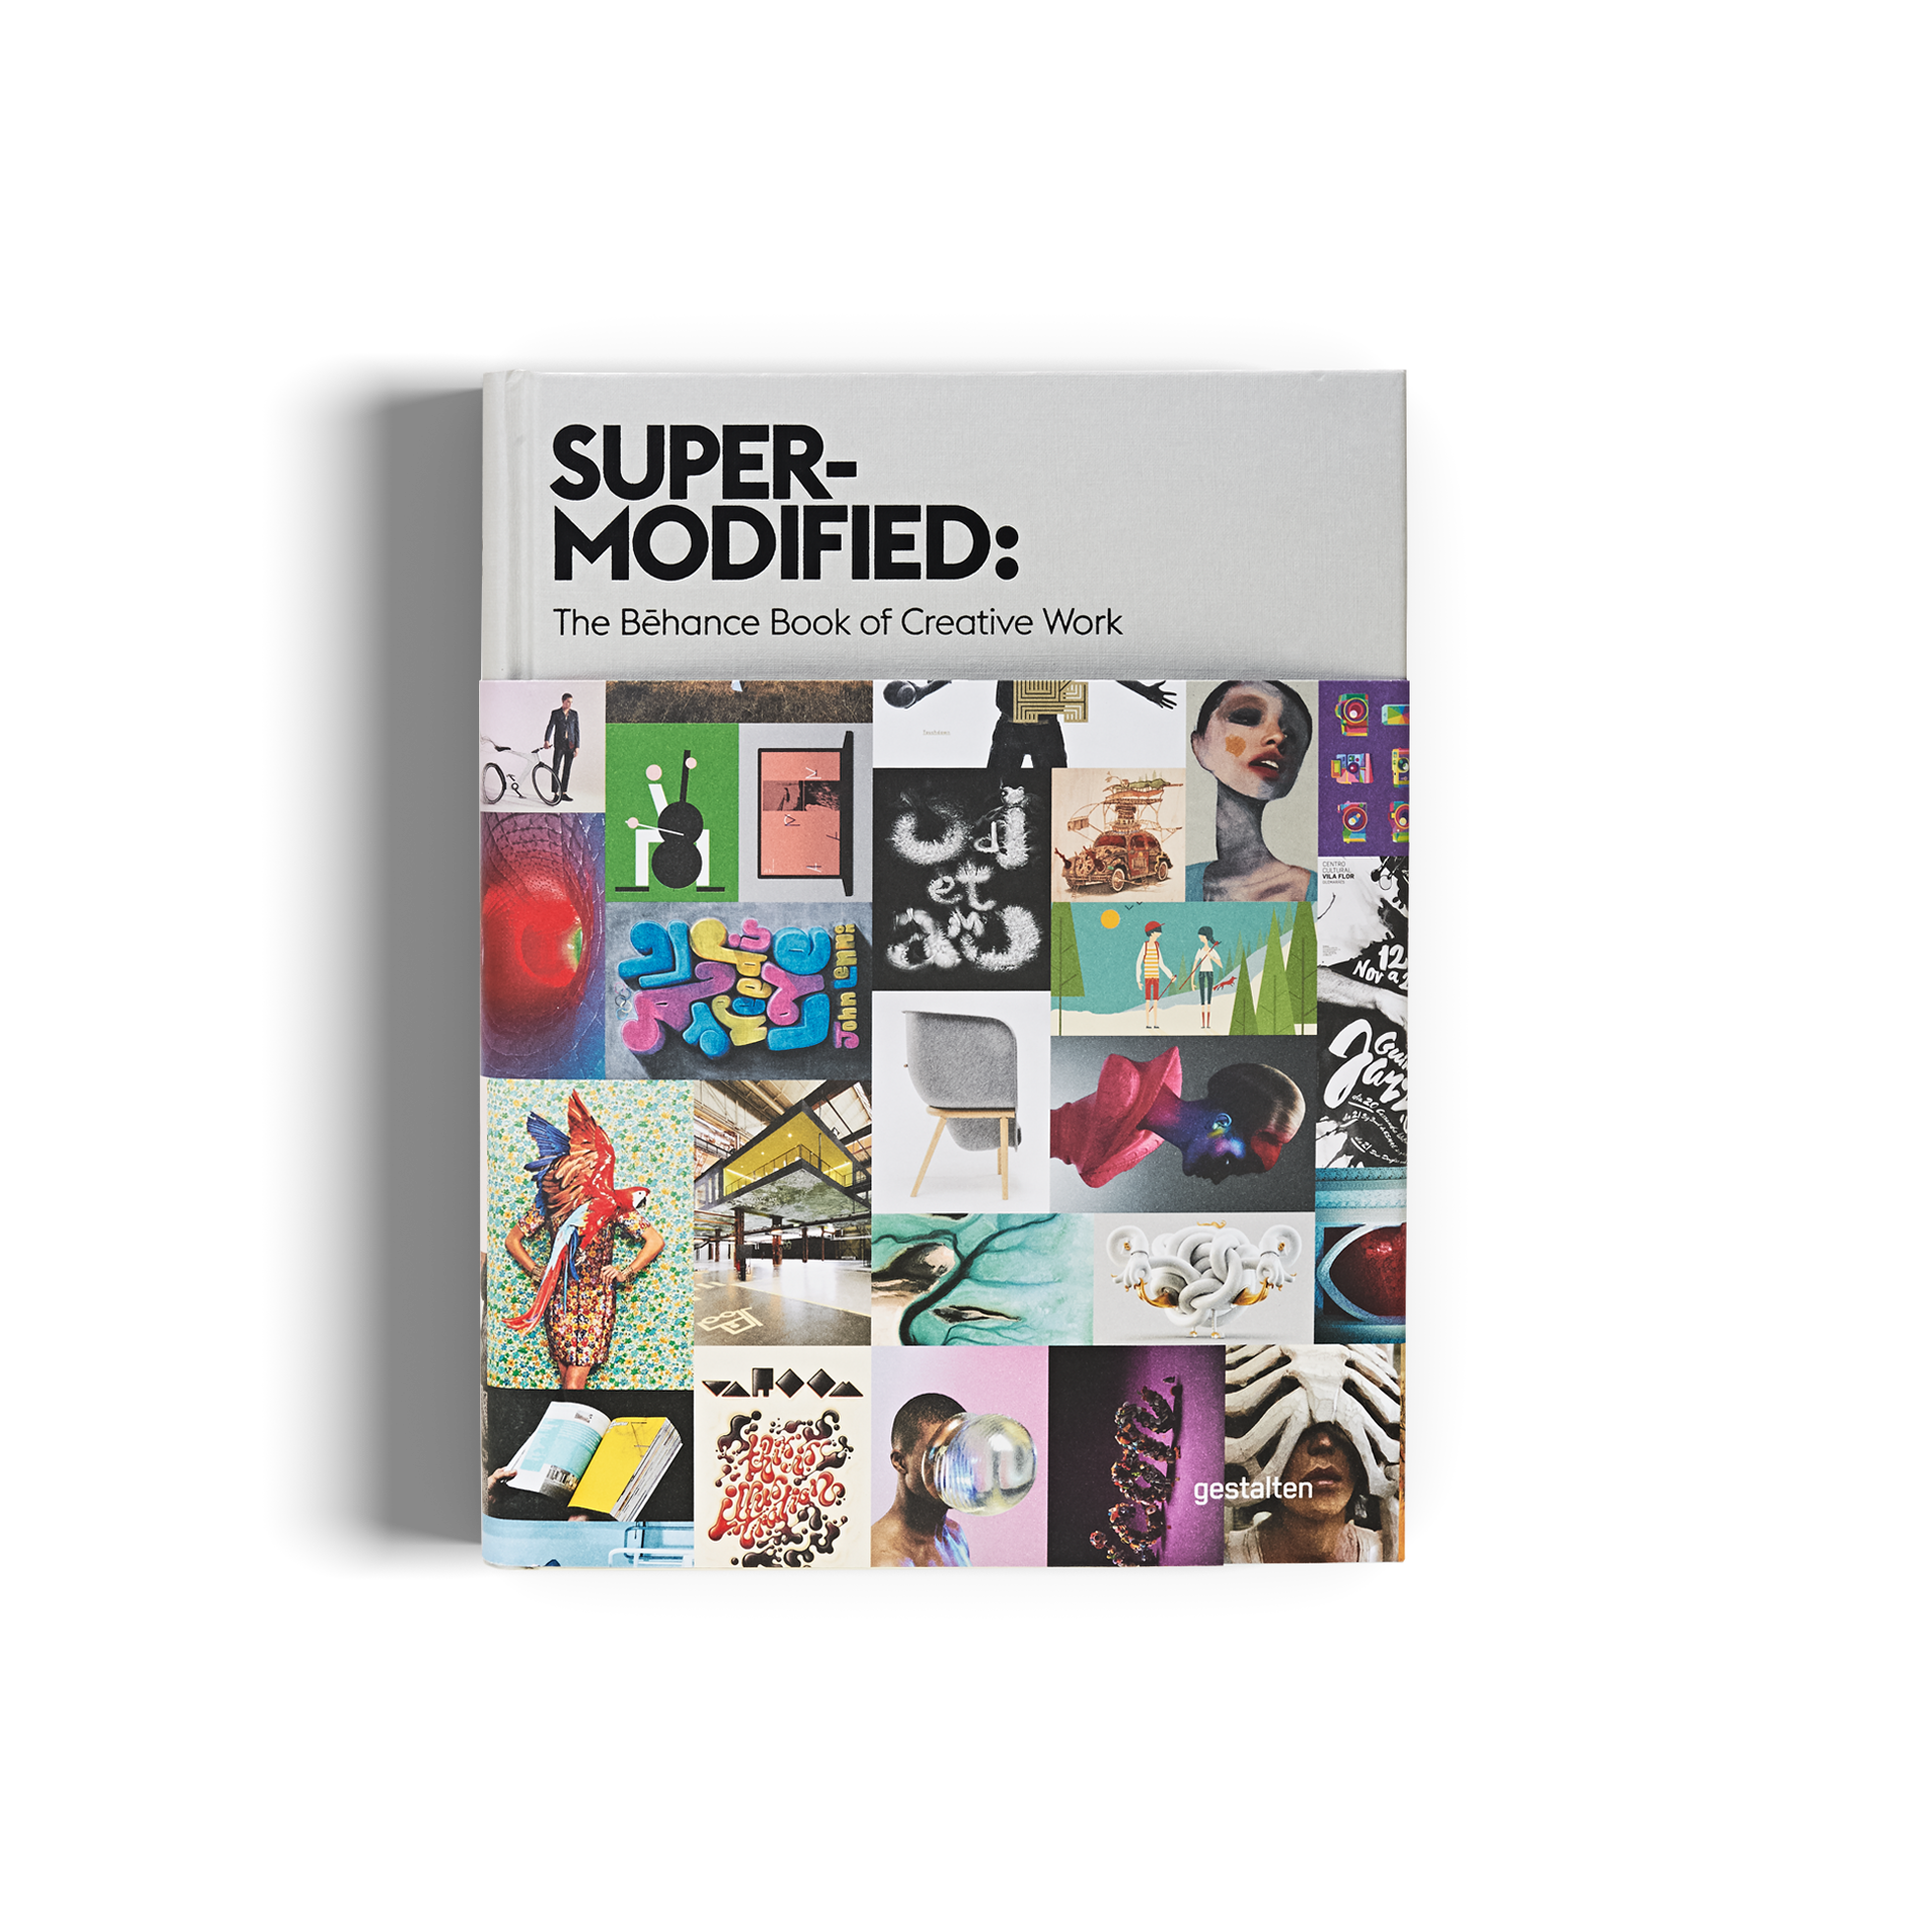 SUPER-MODIFIED - THE BEHANCE BOOK OF CREATIVE WORK